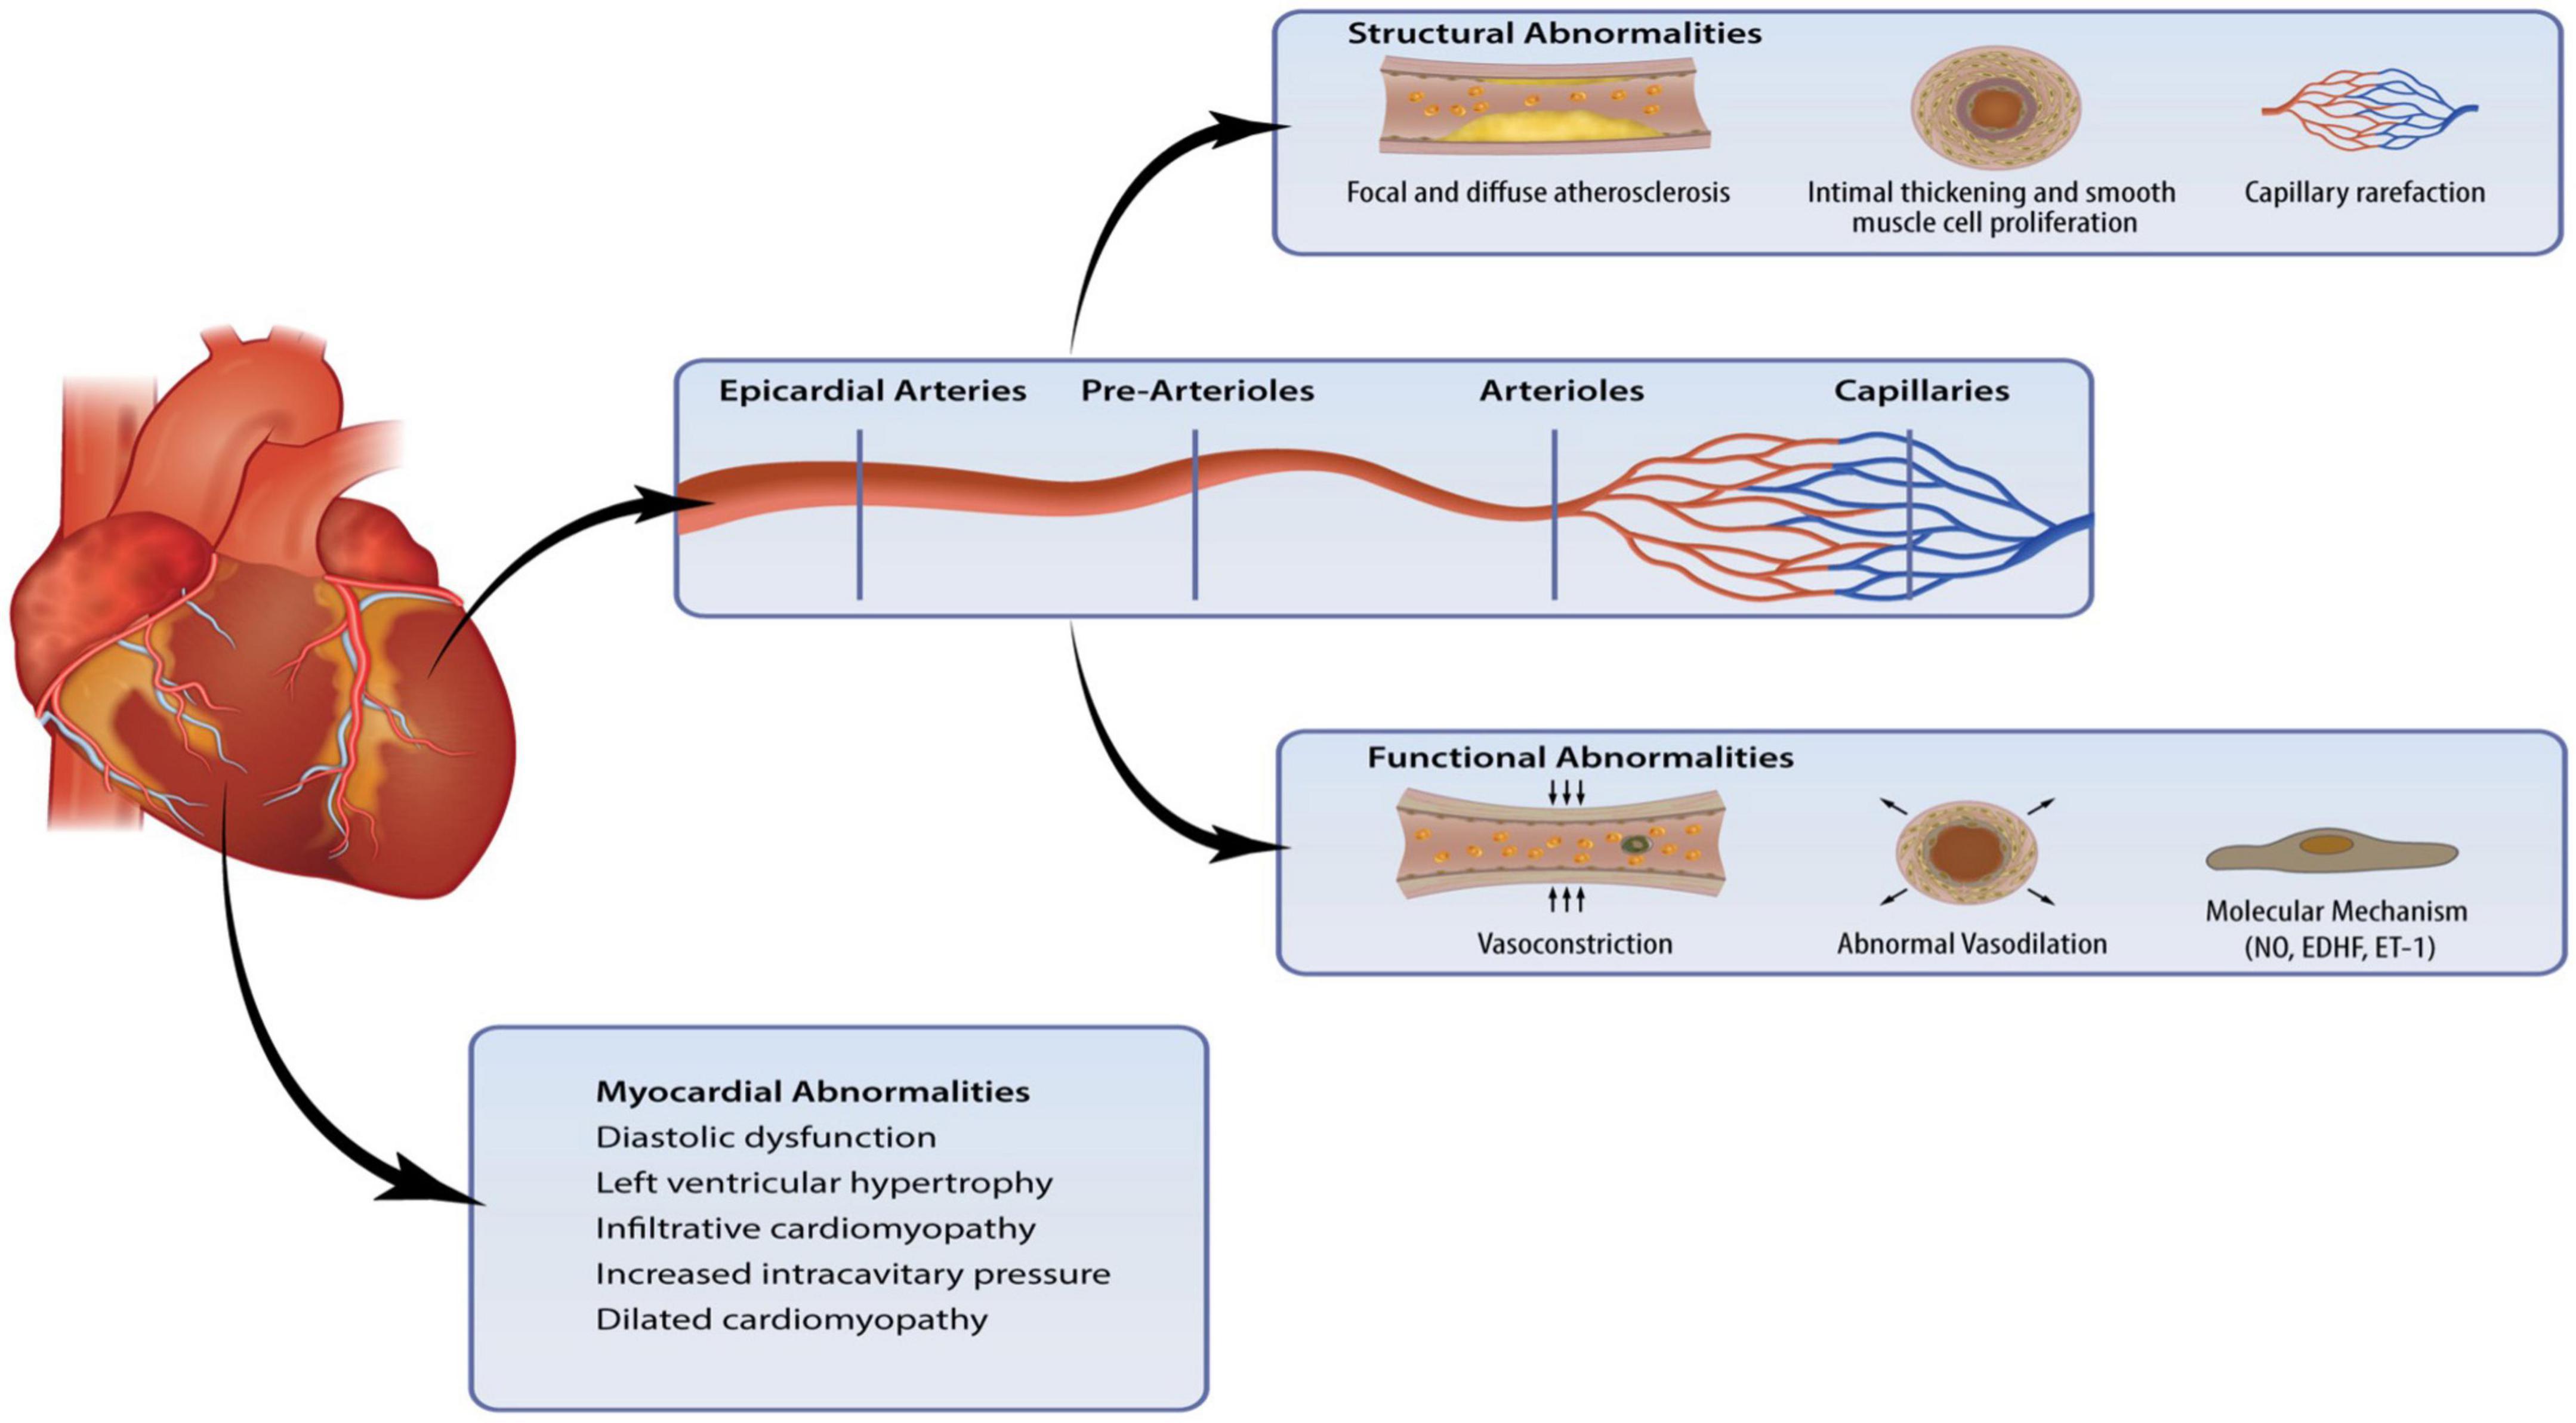 Coronary microvascular dysfunction: A review of recent progress and clinical implications